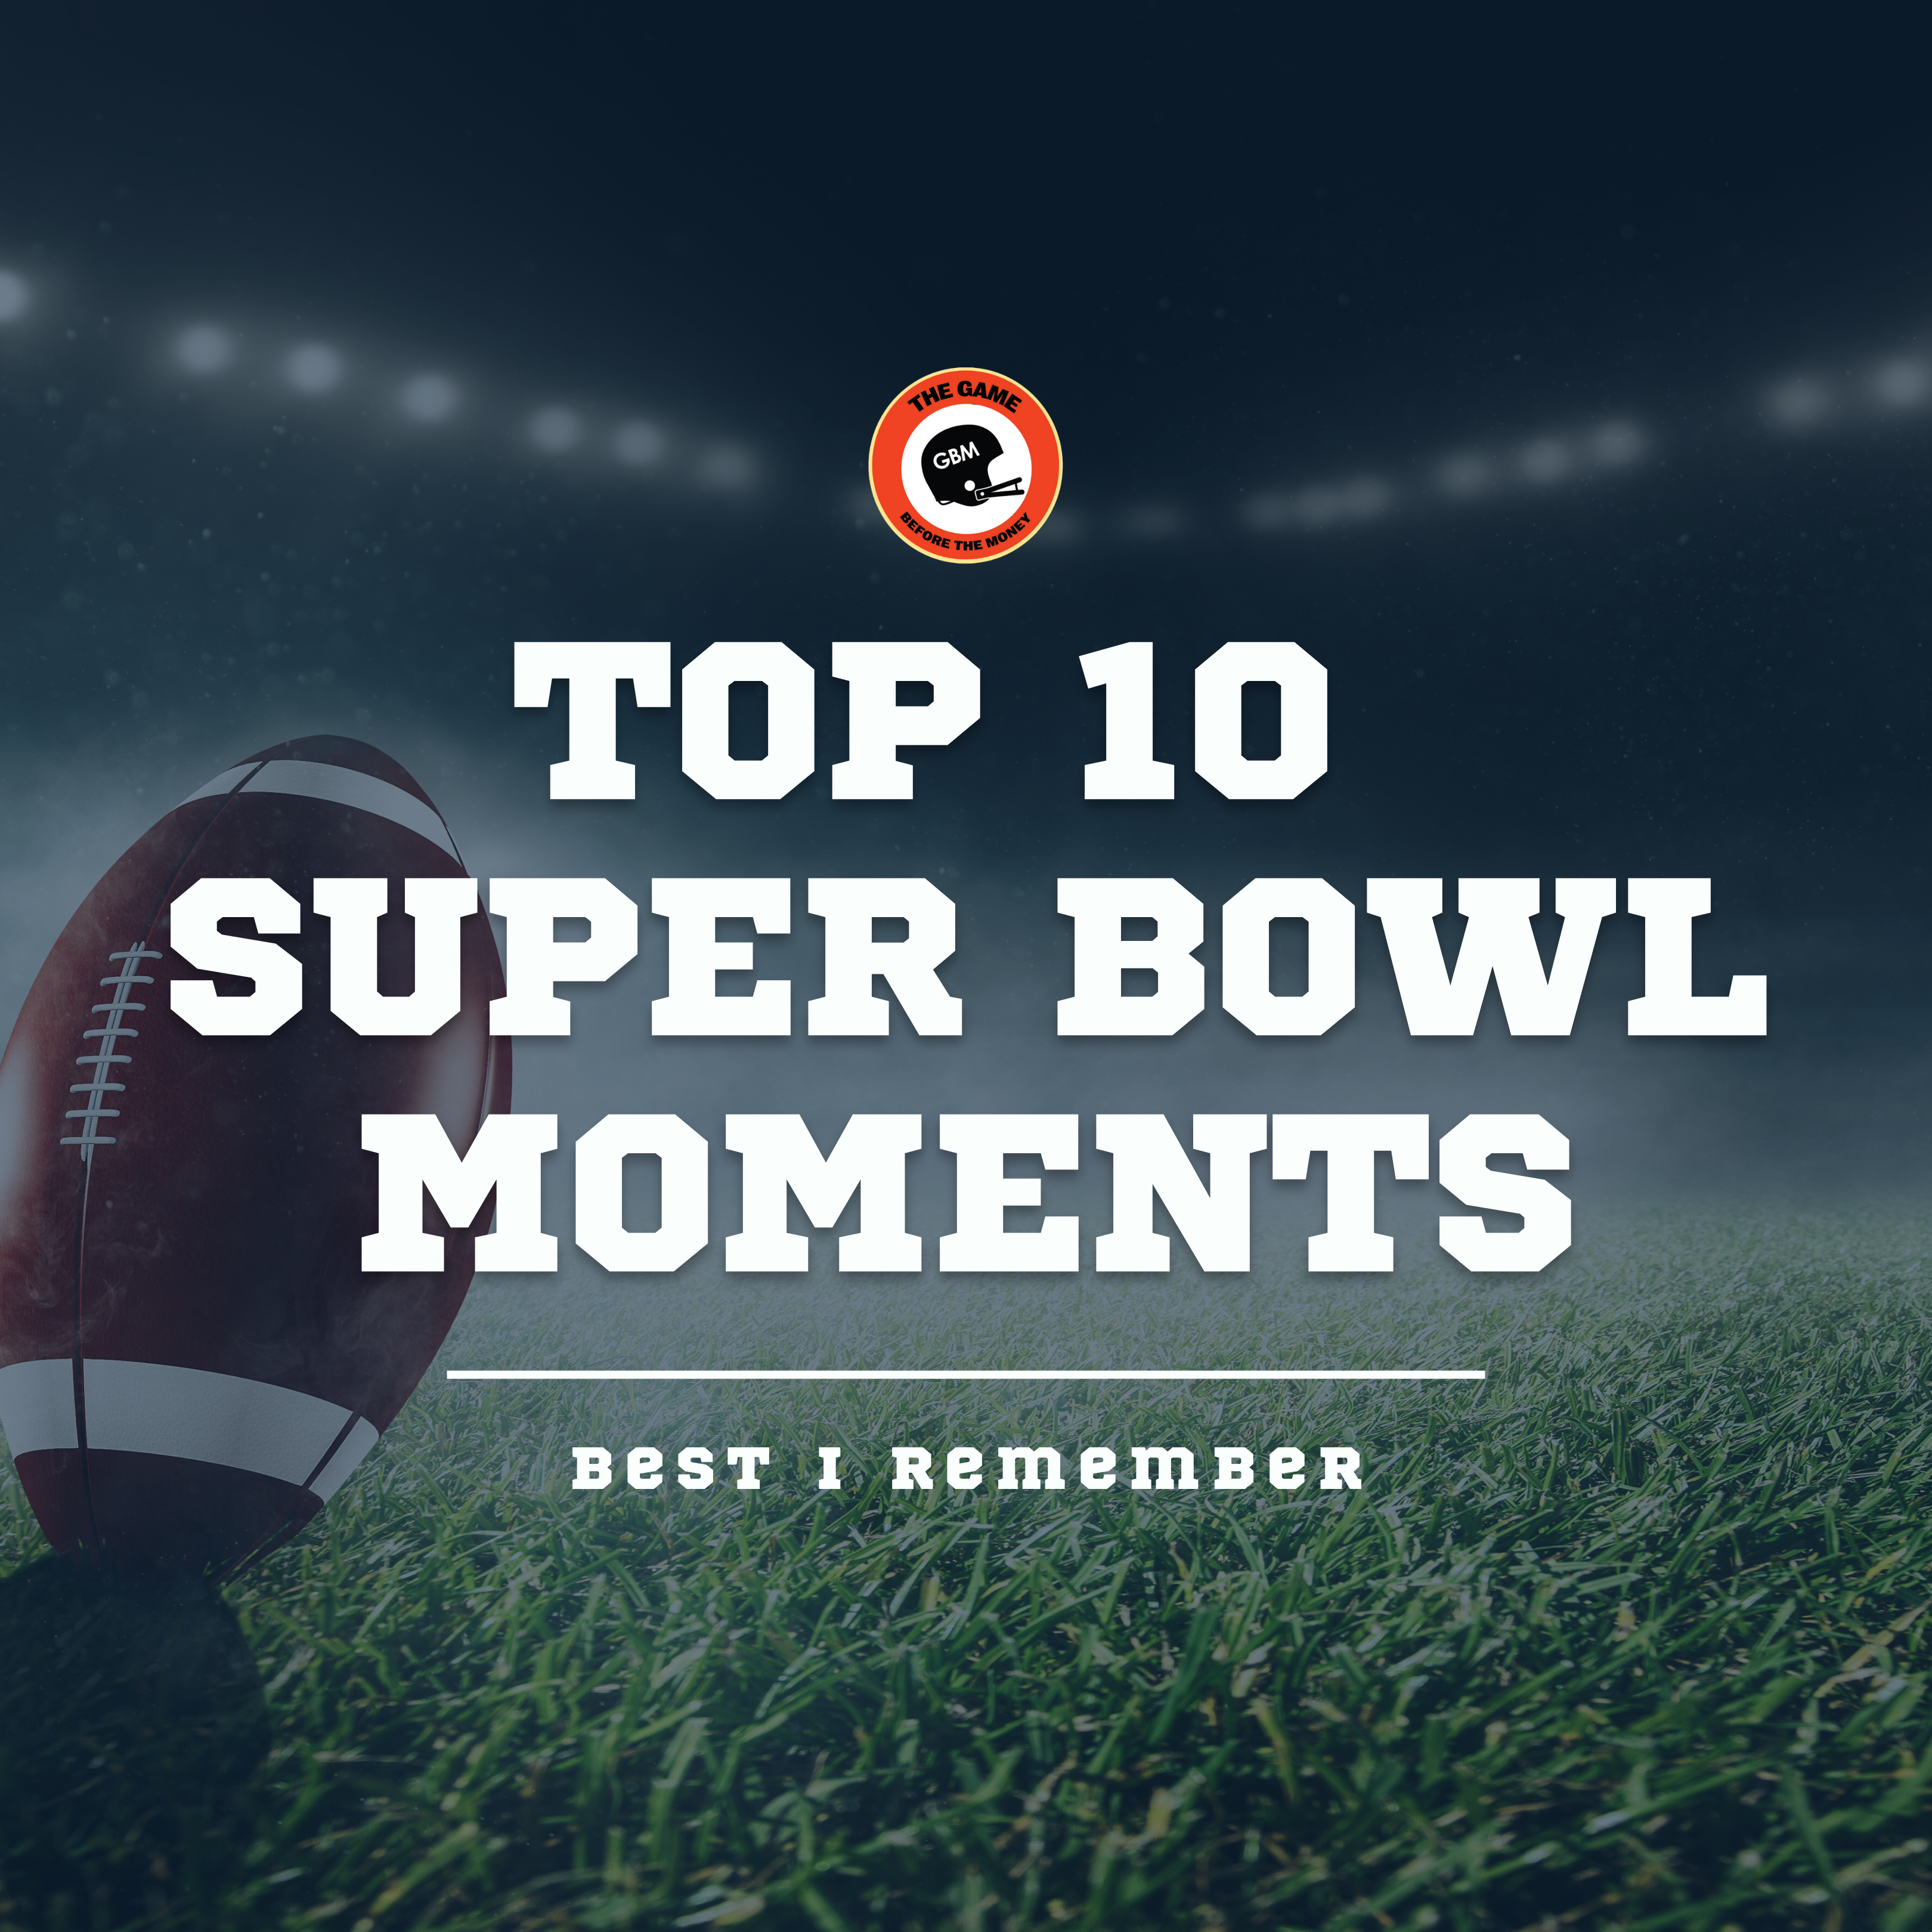 fredelig Hovedløse Forbyde Top 10 Super Bowl Moments | The Game Before the Money